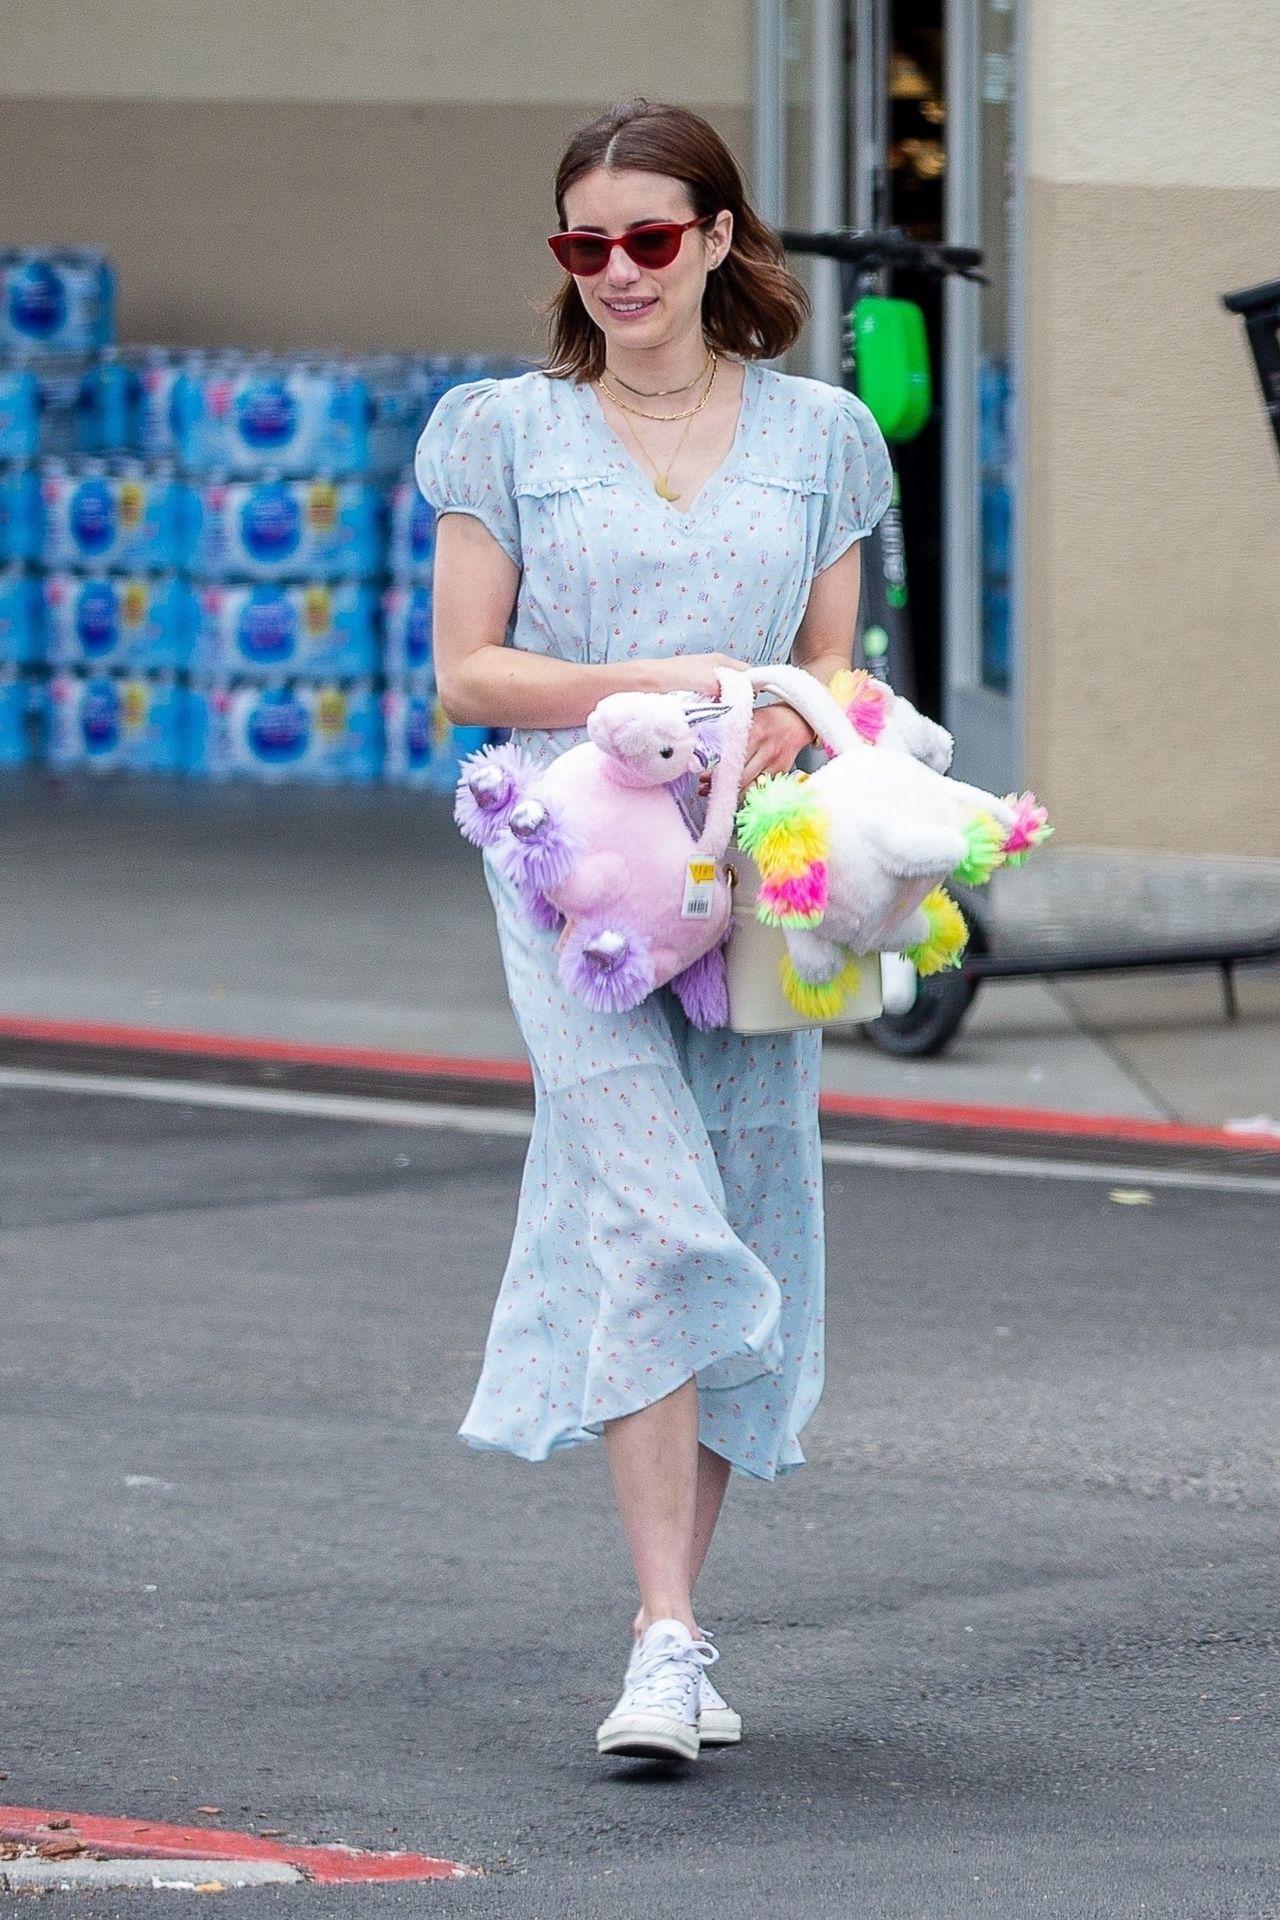 emma-roberts-shopping-on-easter-in-los-angeles-04-21-2019-0.jpg